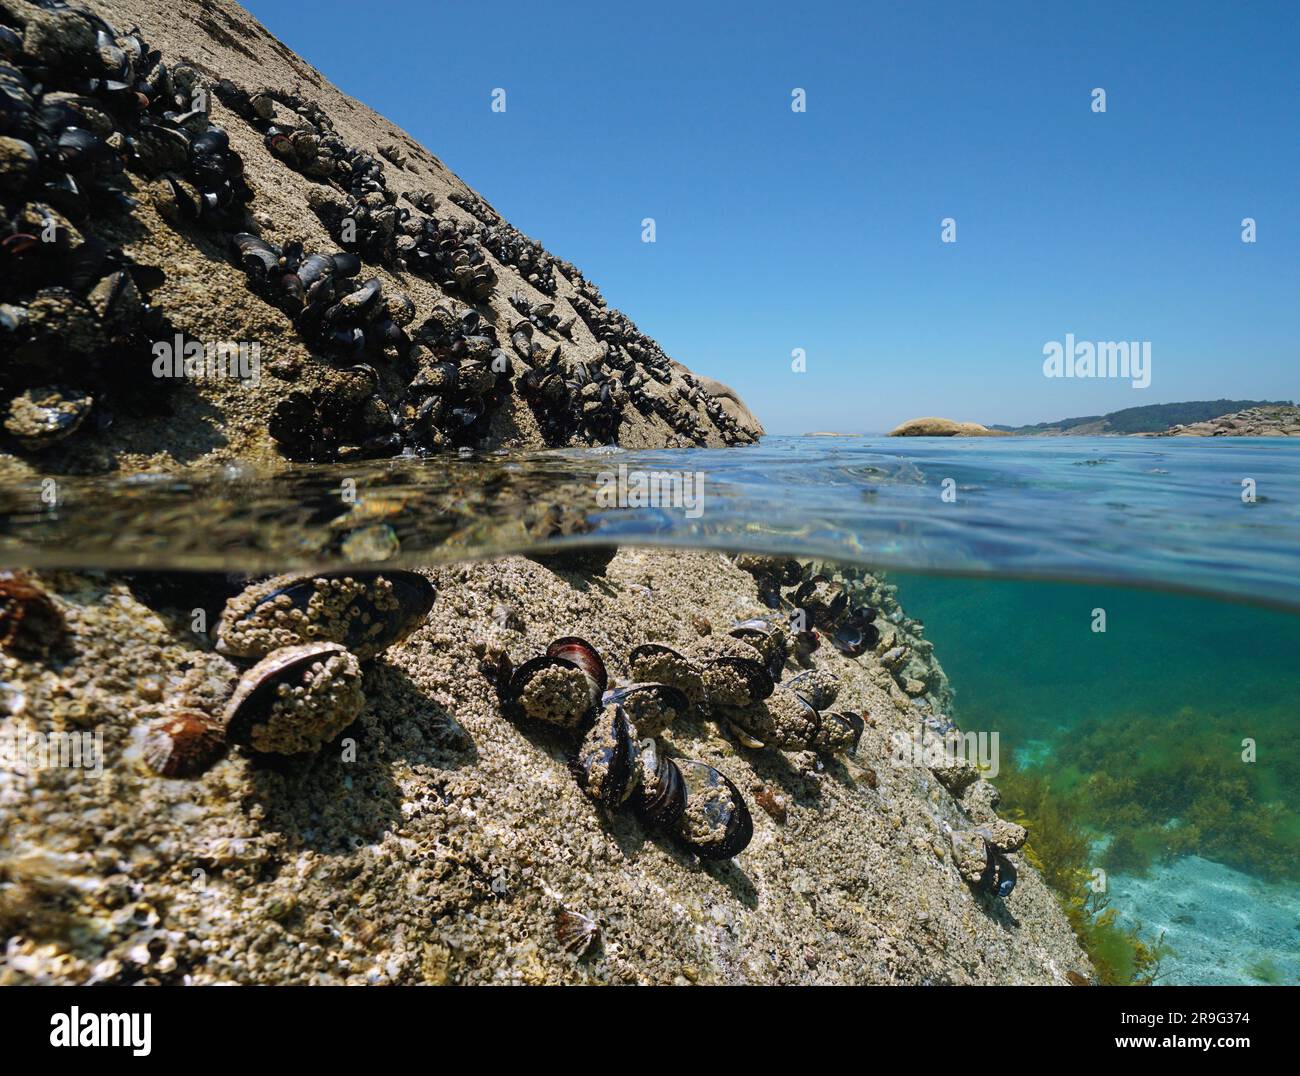 Mussels and barnacles on a rock on the sea shore, split level view over and under water surface, Atlantic ocean, Spain, Galicia Stock Photo